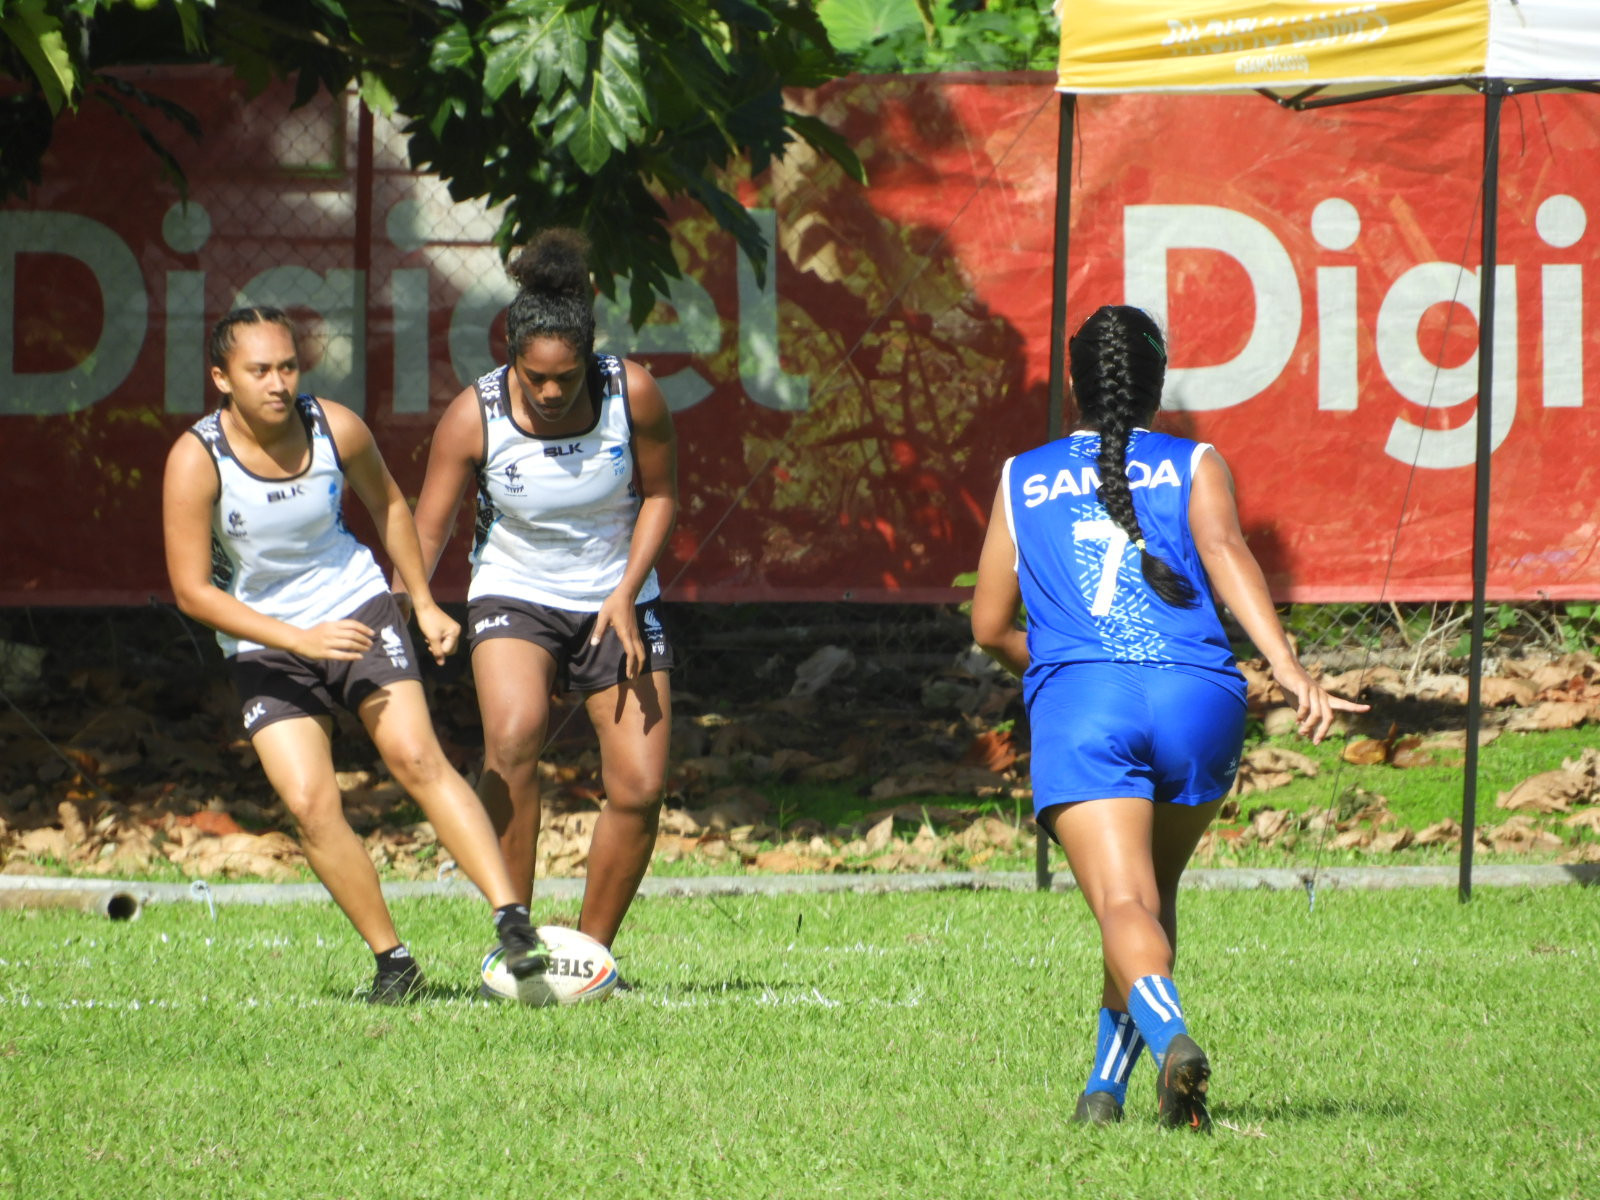 The financial and coaching support of Australia's Gavin Shuker has helped Fiji Touch Federation field a full team, including a women's team, at the upcoming Pacific Games in the Solomon Islands ©FASANOC